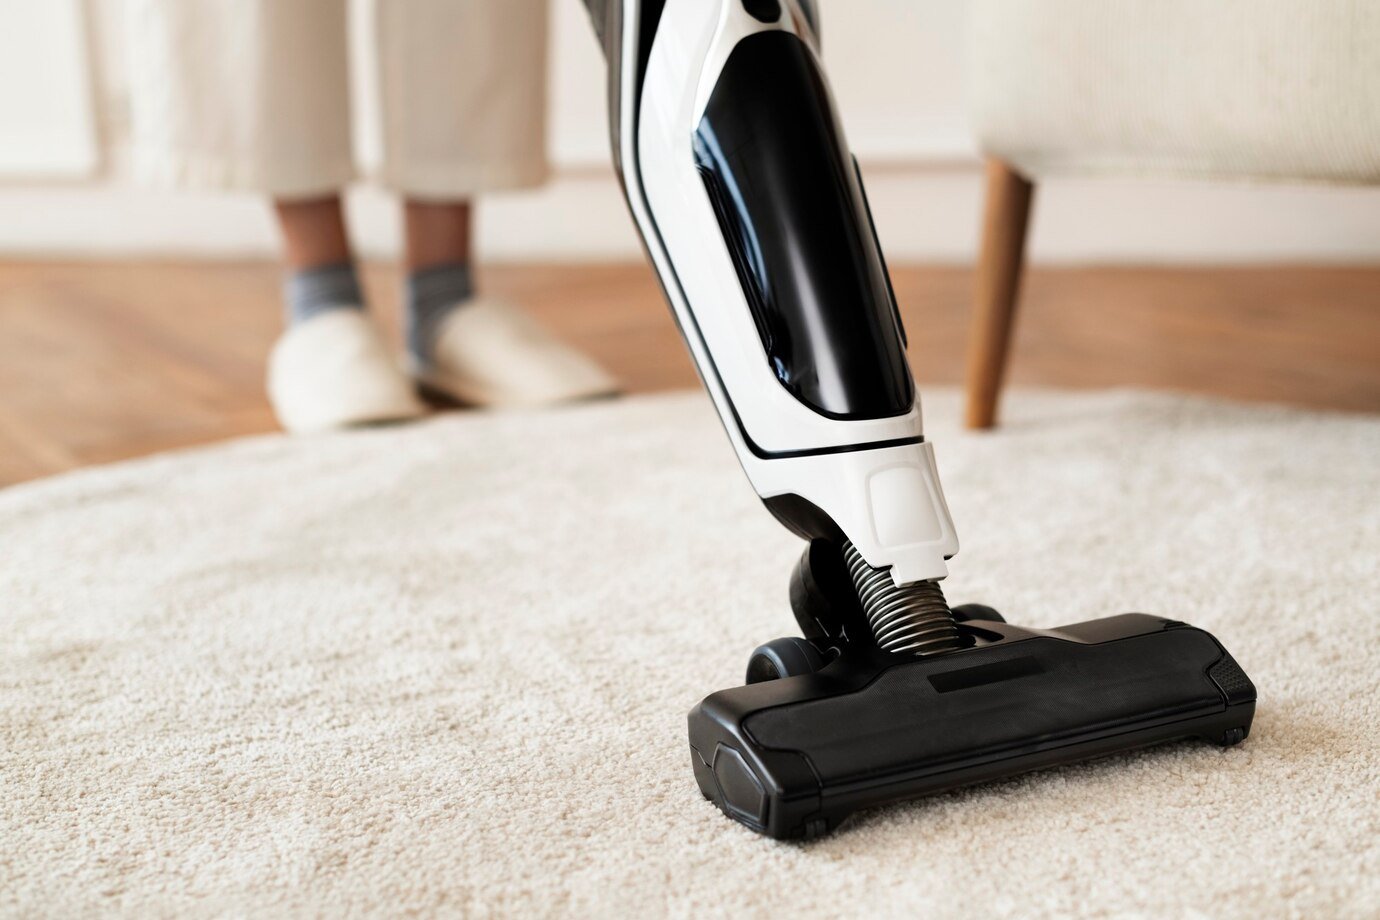 Person using an upright vacuum cleaner for house cleaning on a carpeted floor.